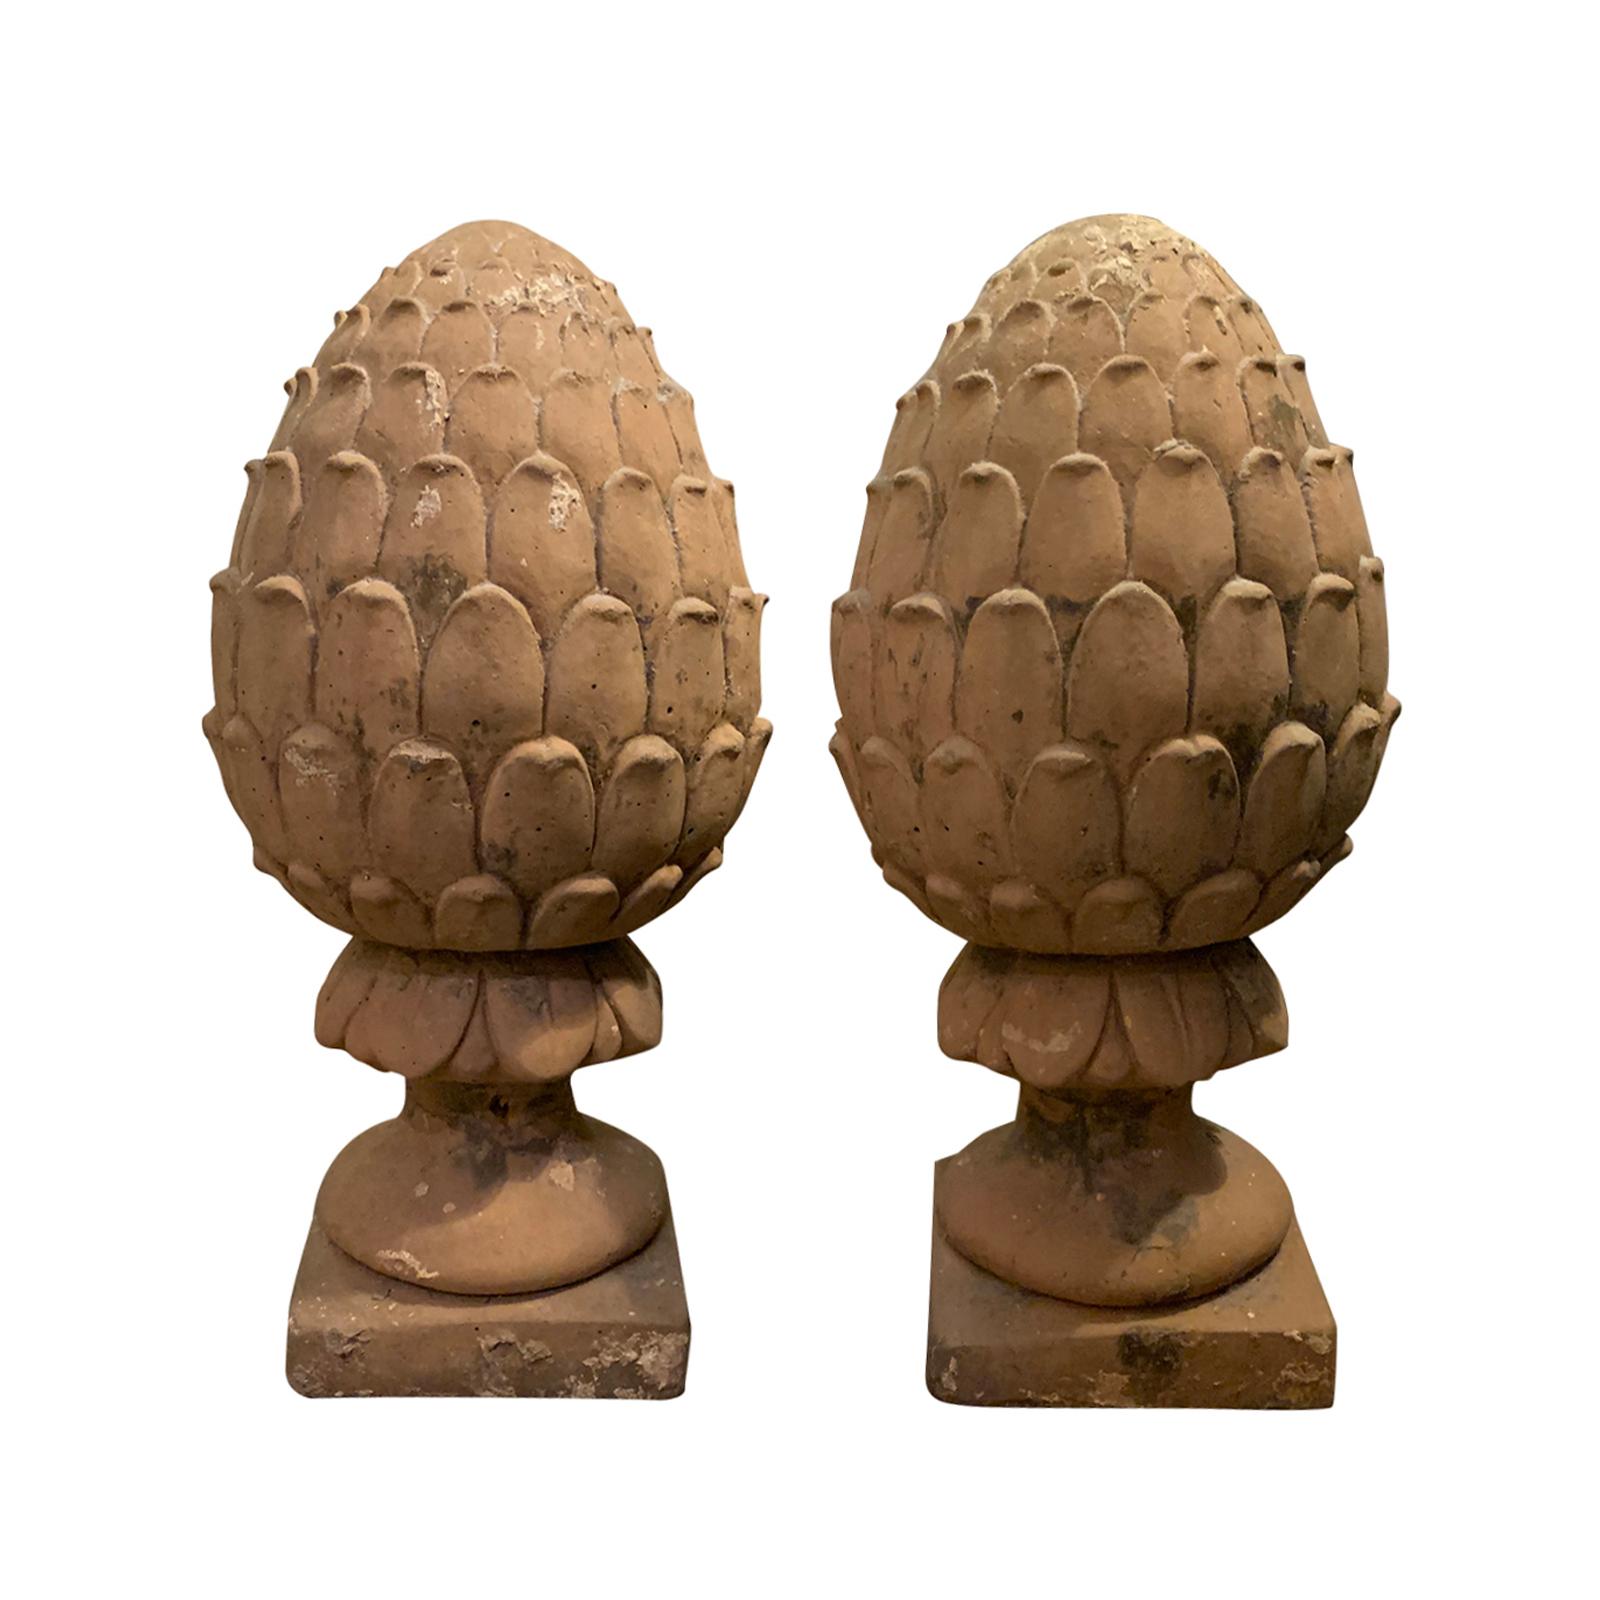 Pair of 20th century stone pineapple garden statues / ornaments.